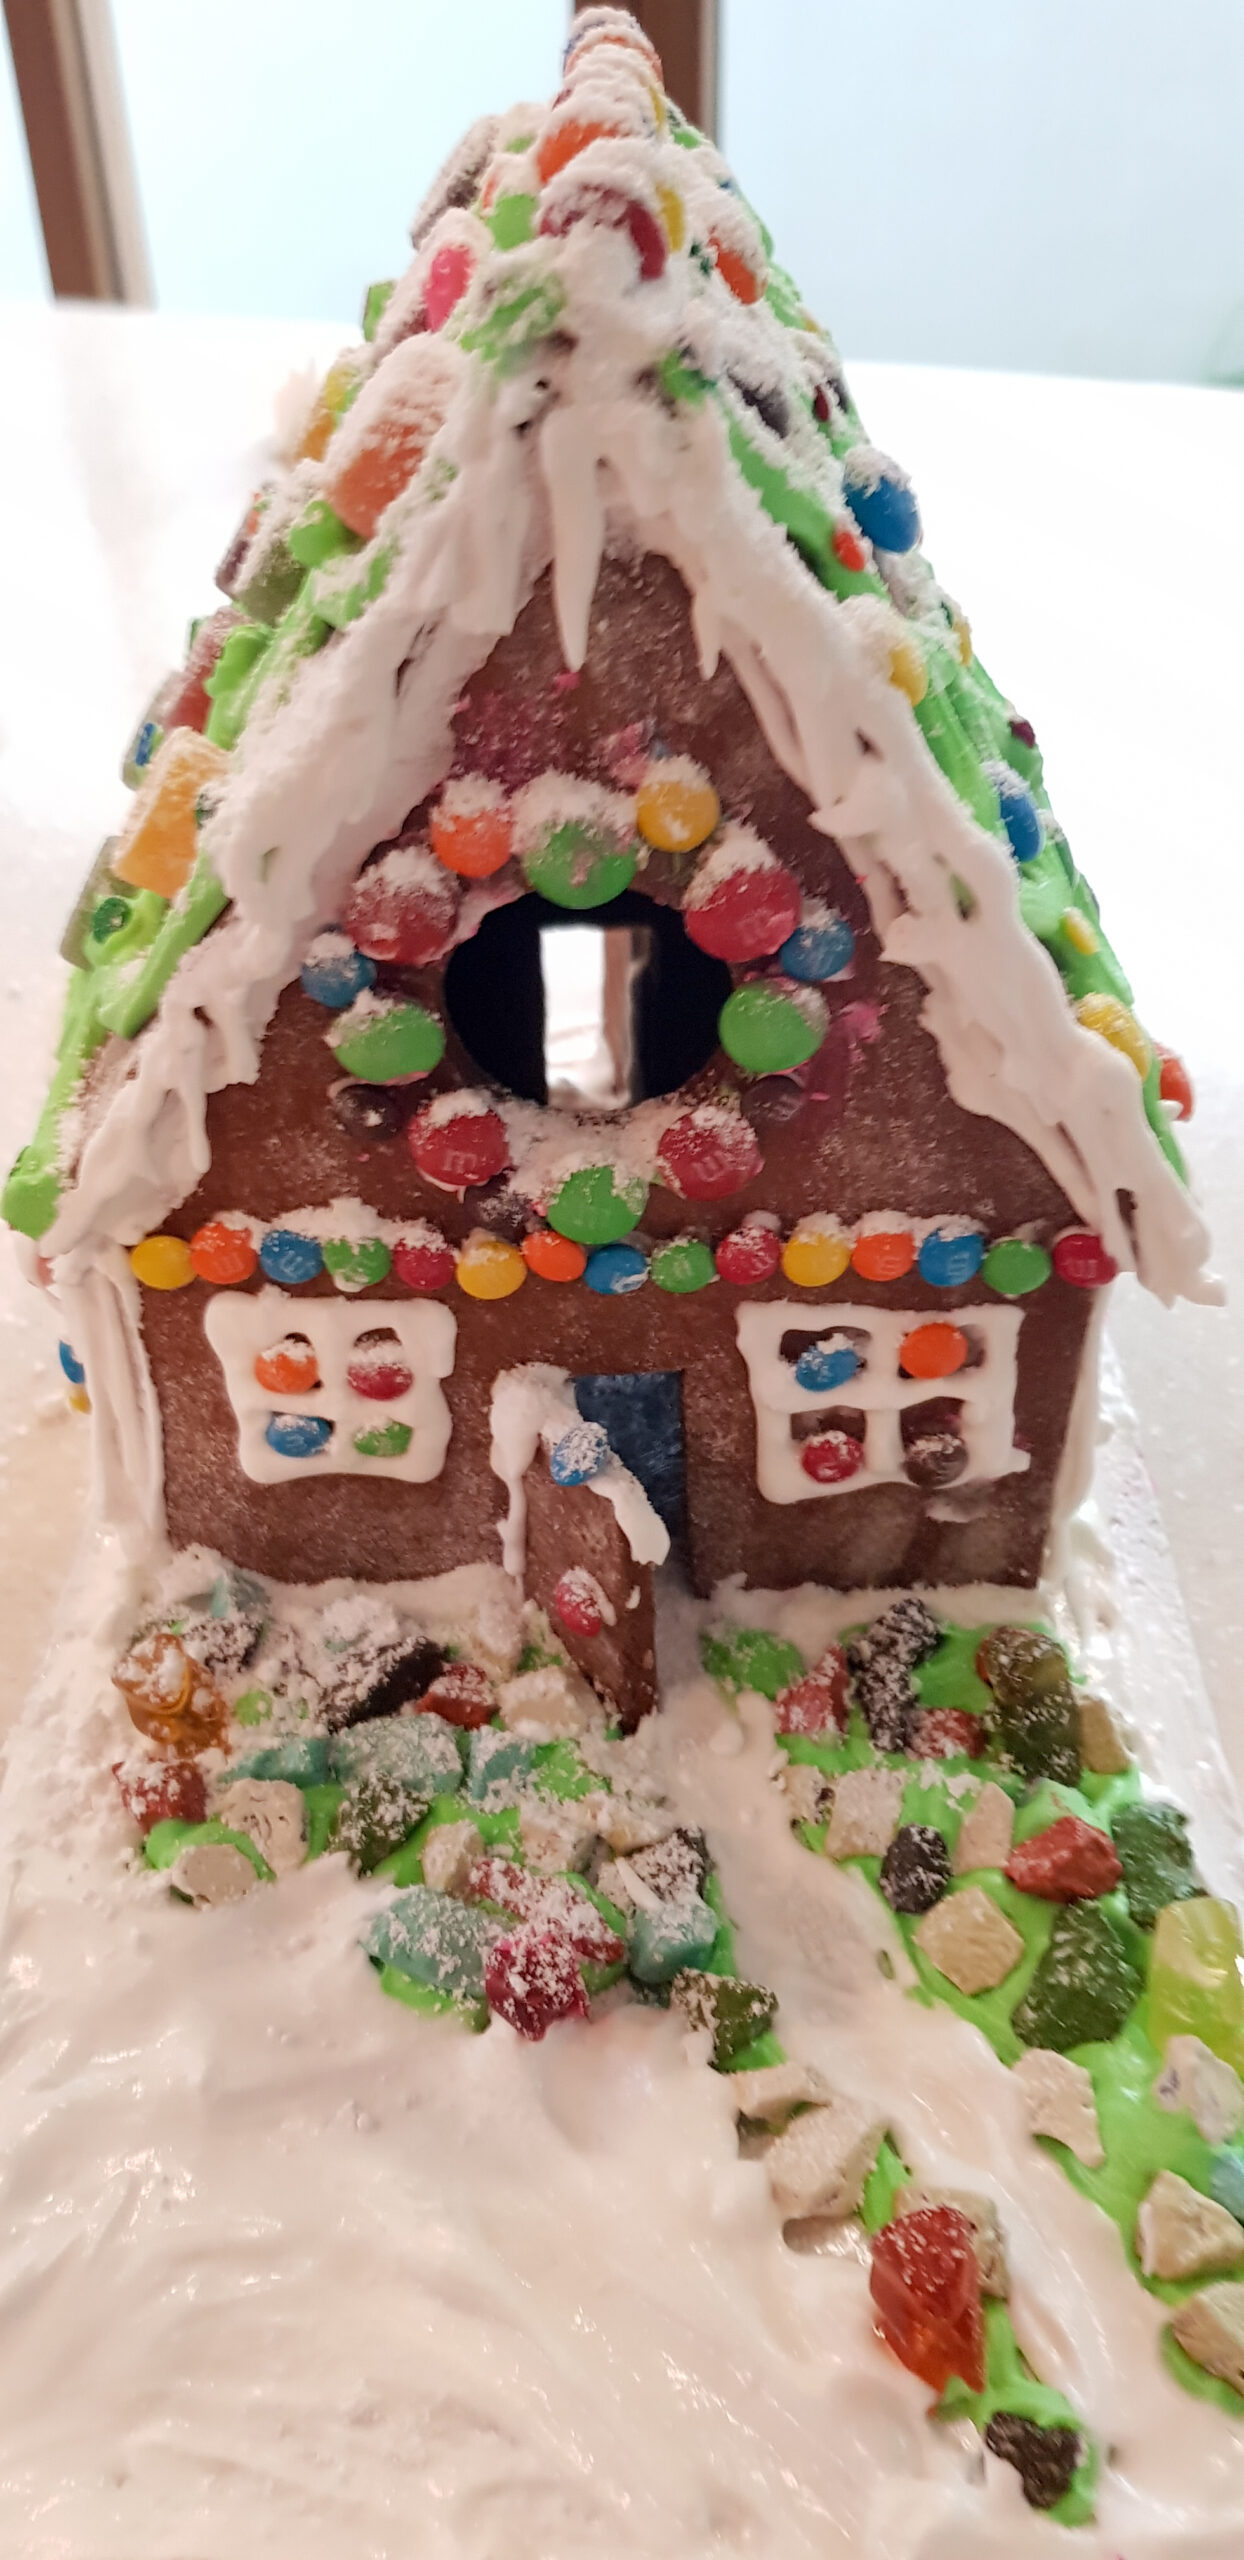 The Gingerbread House Reminder – Family Traditions